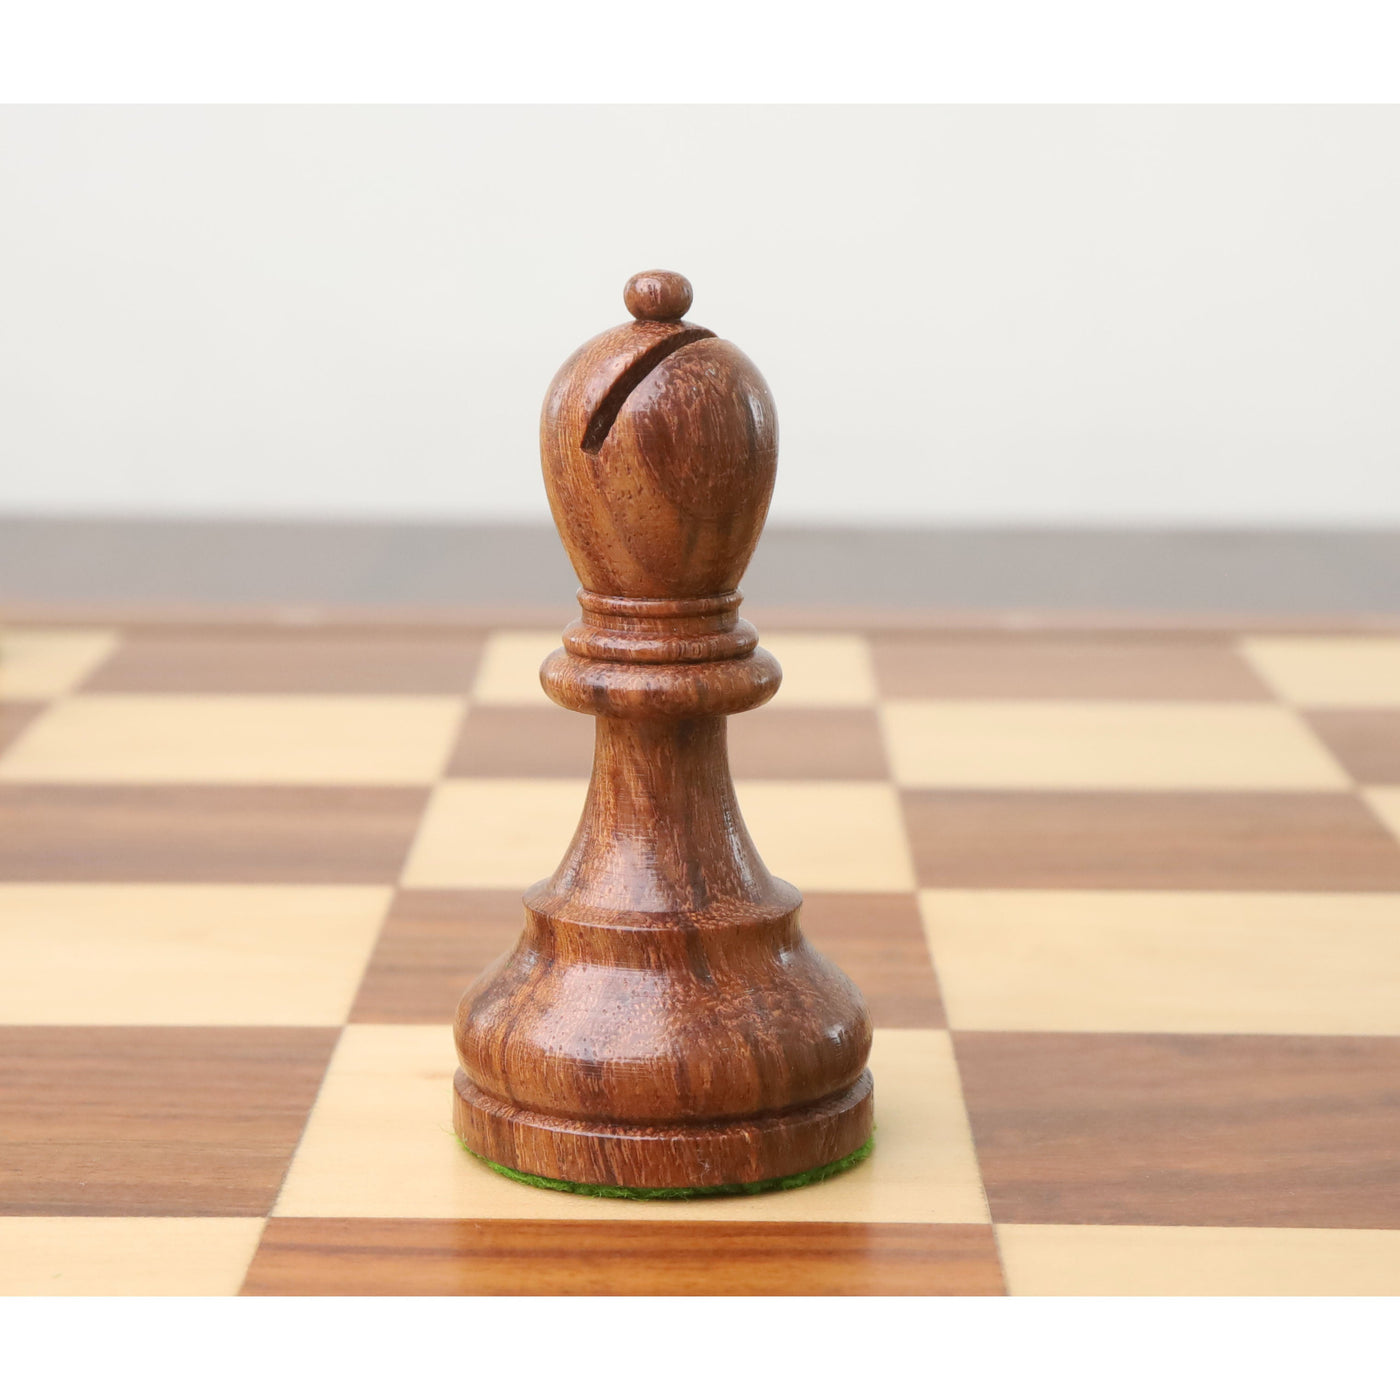 Slightly Imperfect 3.8" Reykjavik Series Staunton Wooden Chess Set - Chess Pieces Only - Weighted Sheesham Wood